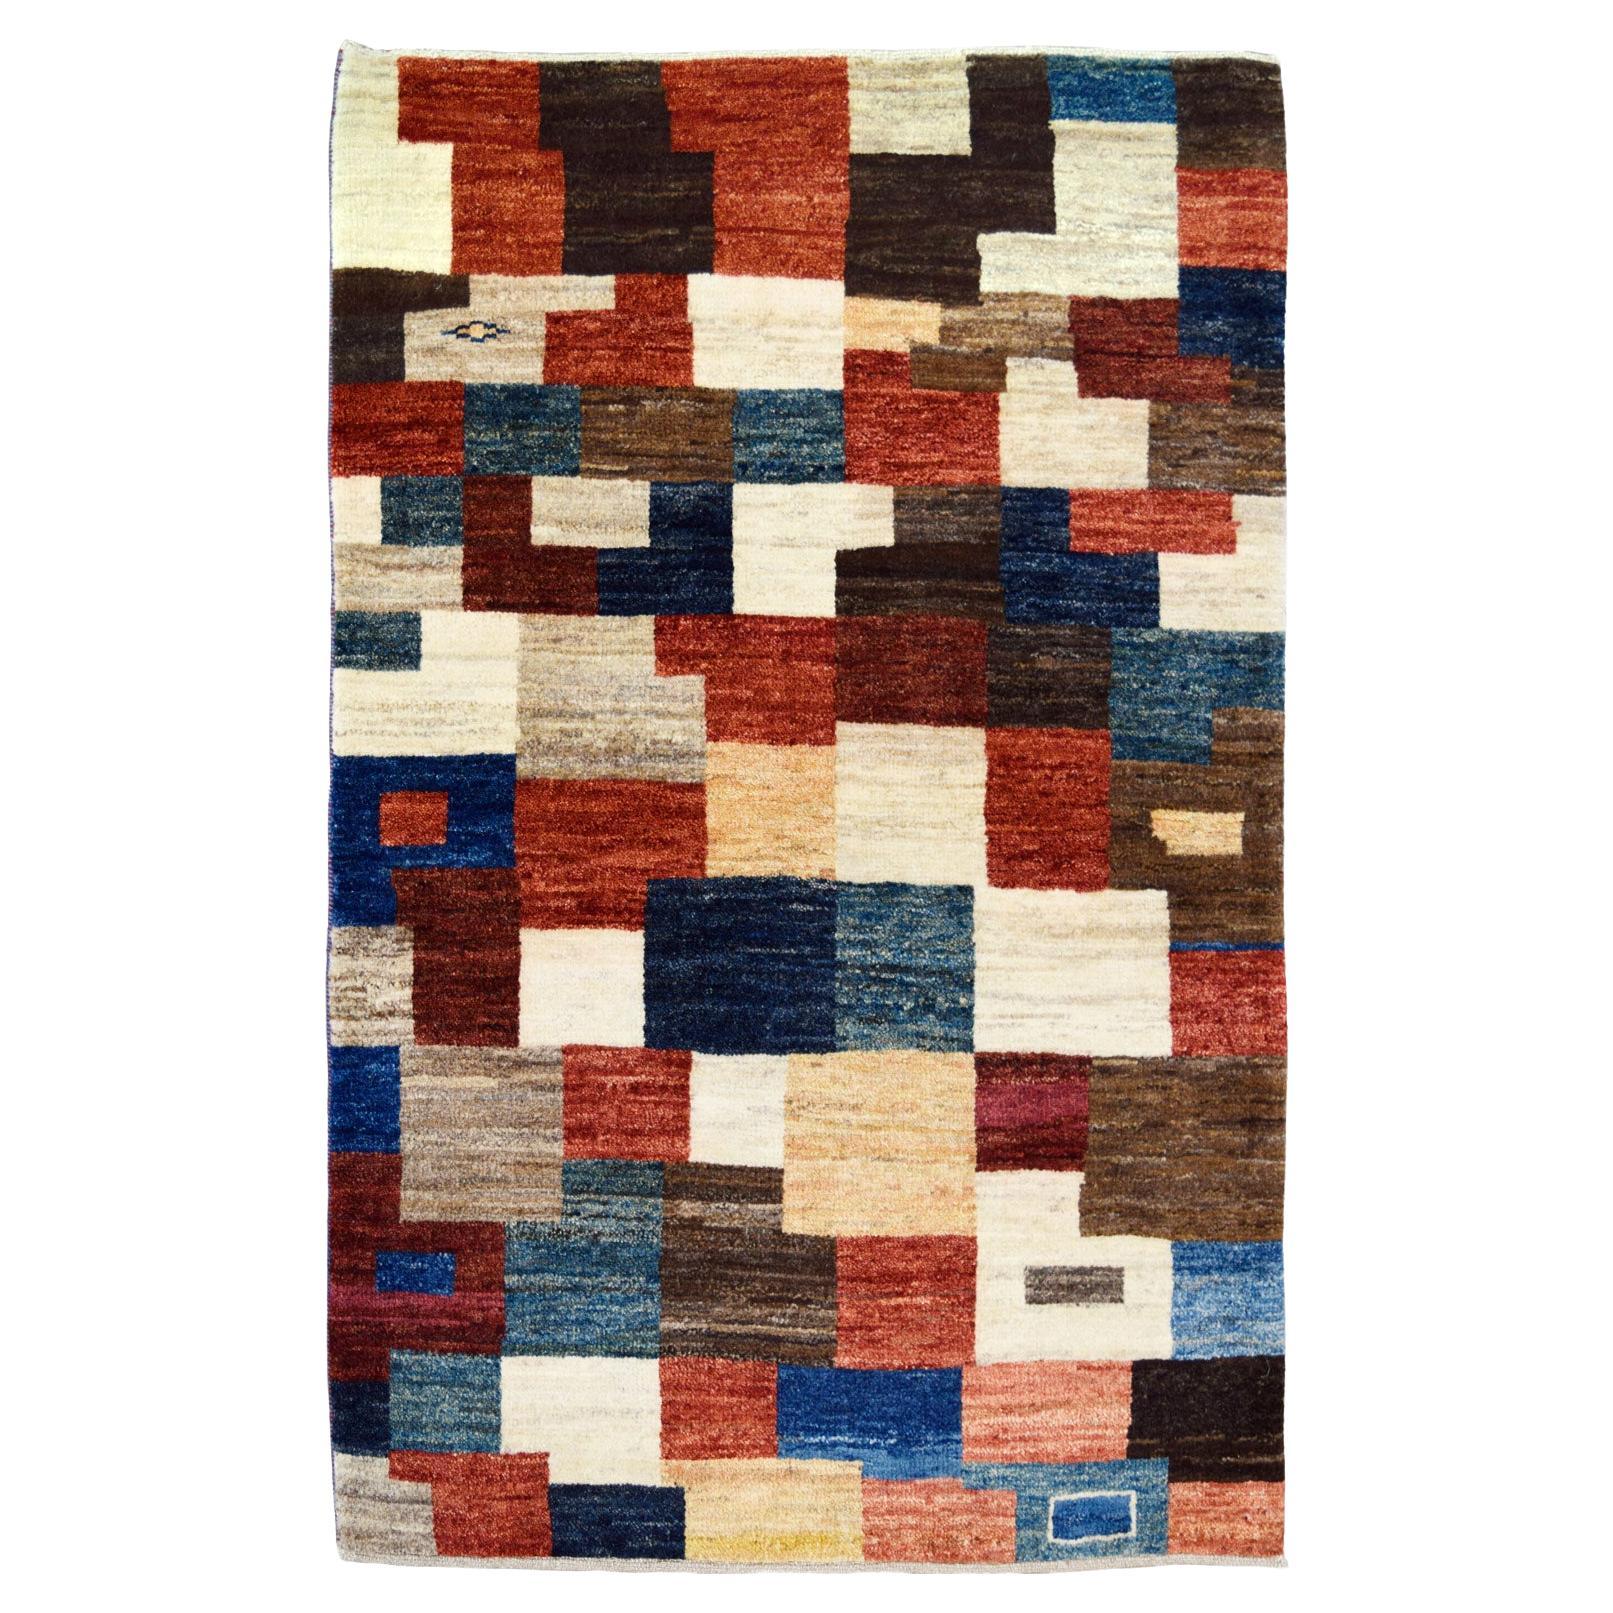 "The Village" Wool Persian Luri Gabbeh Tribal Rug, Blue, Red, Taupe, 3' x 4'